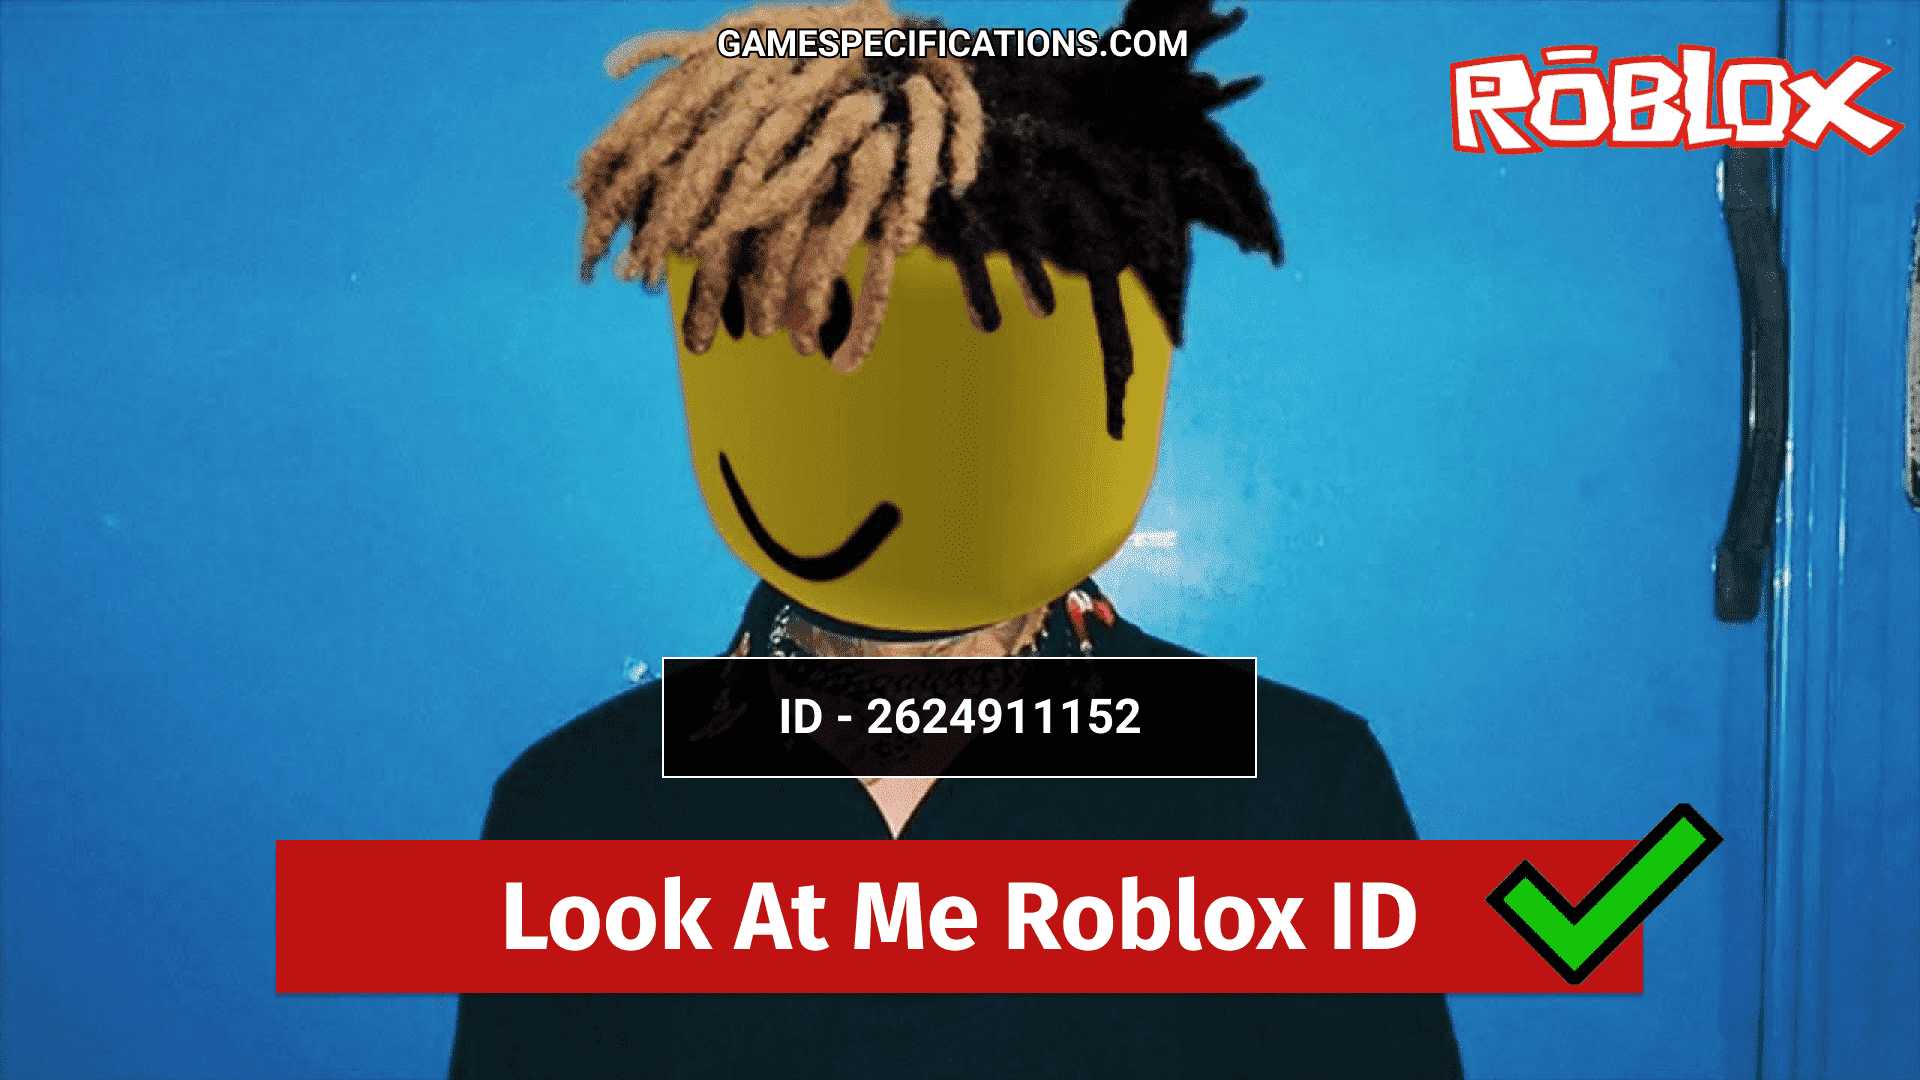 Look At Me Roblox Id Codes 2021 Game Specifications - bypassed roblox audio 2020 list